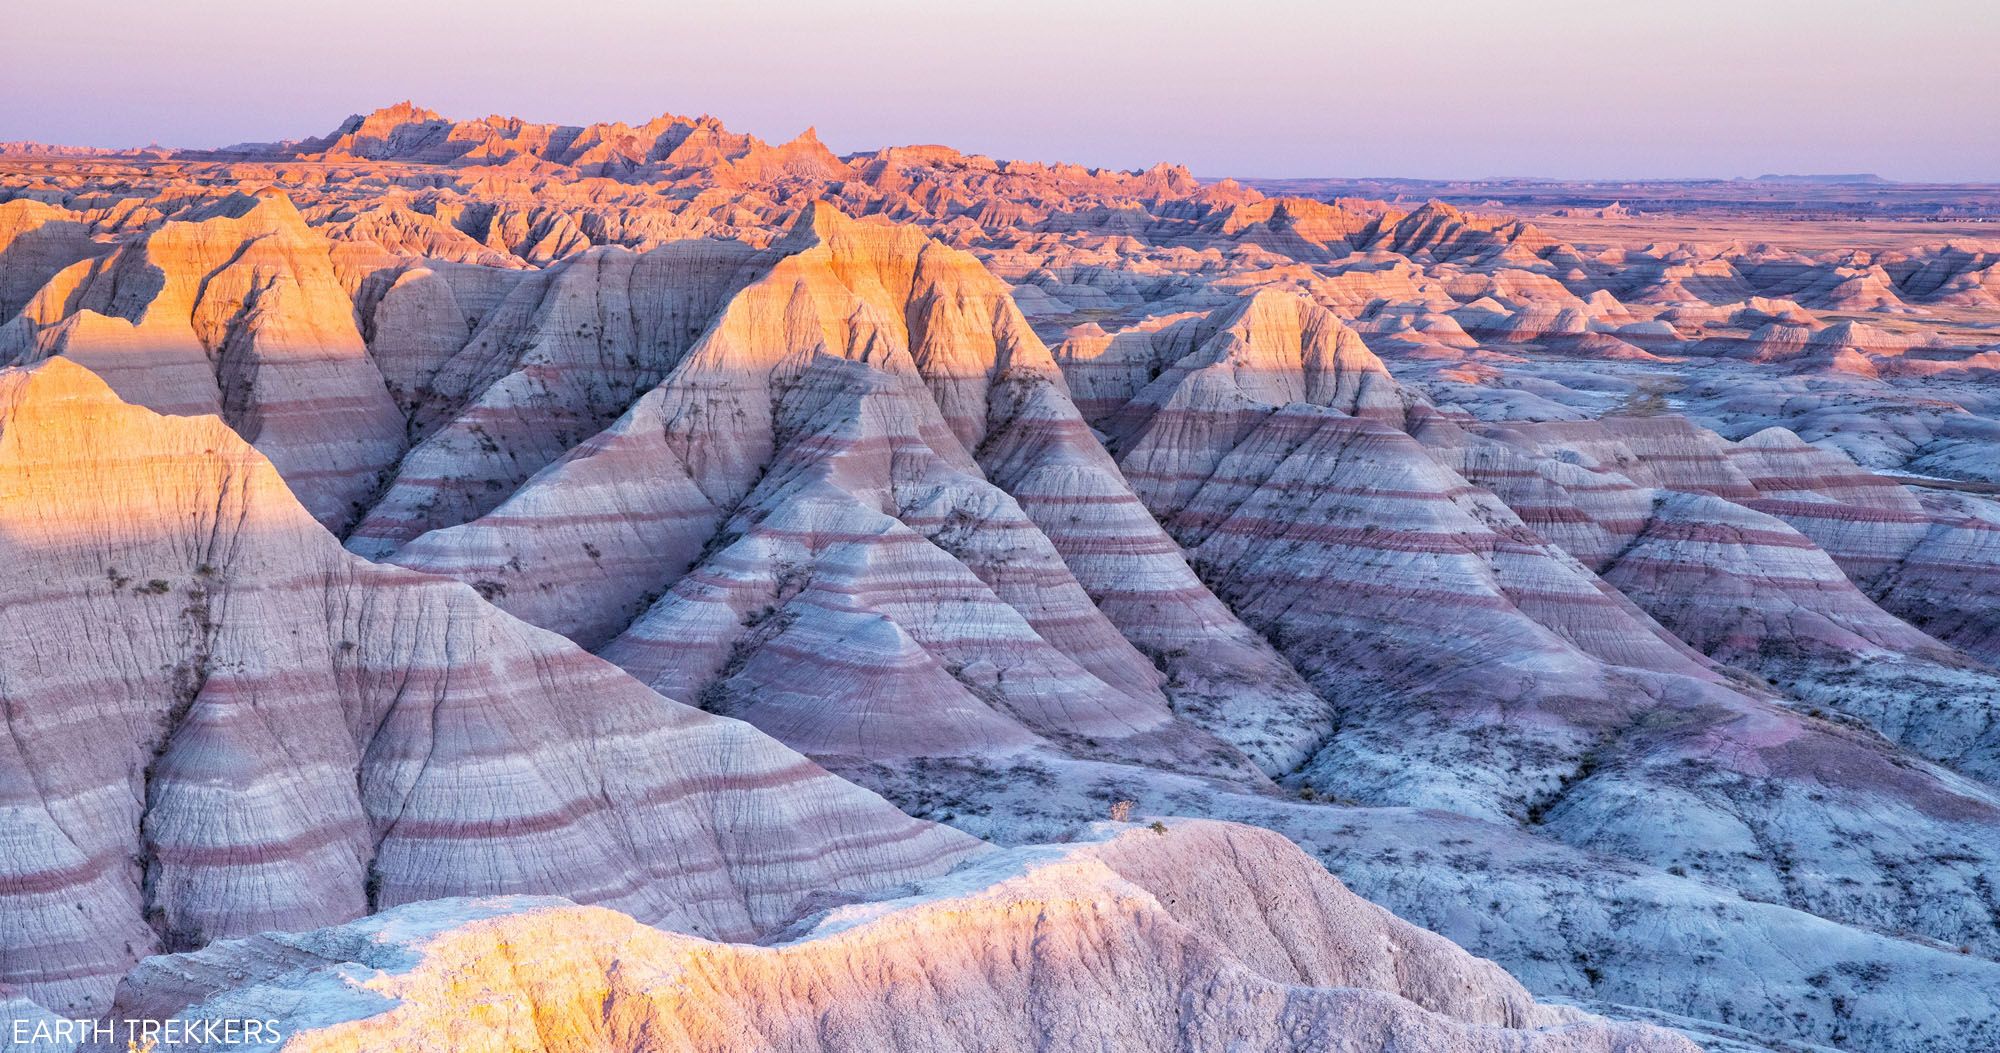 One Day in Badlands